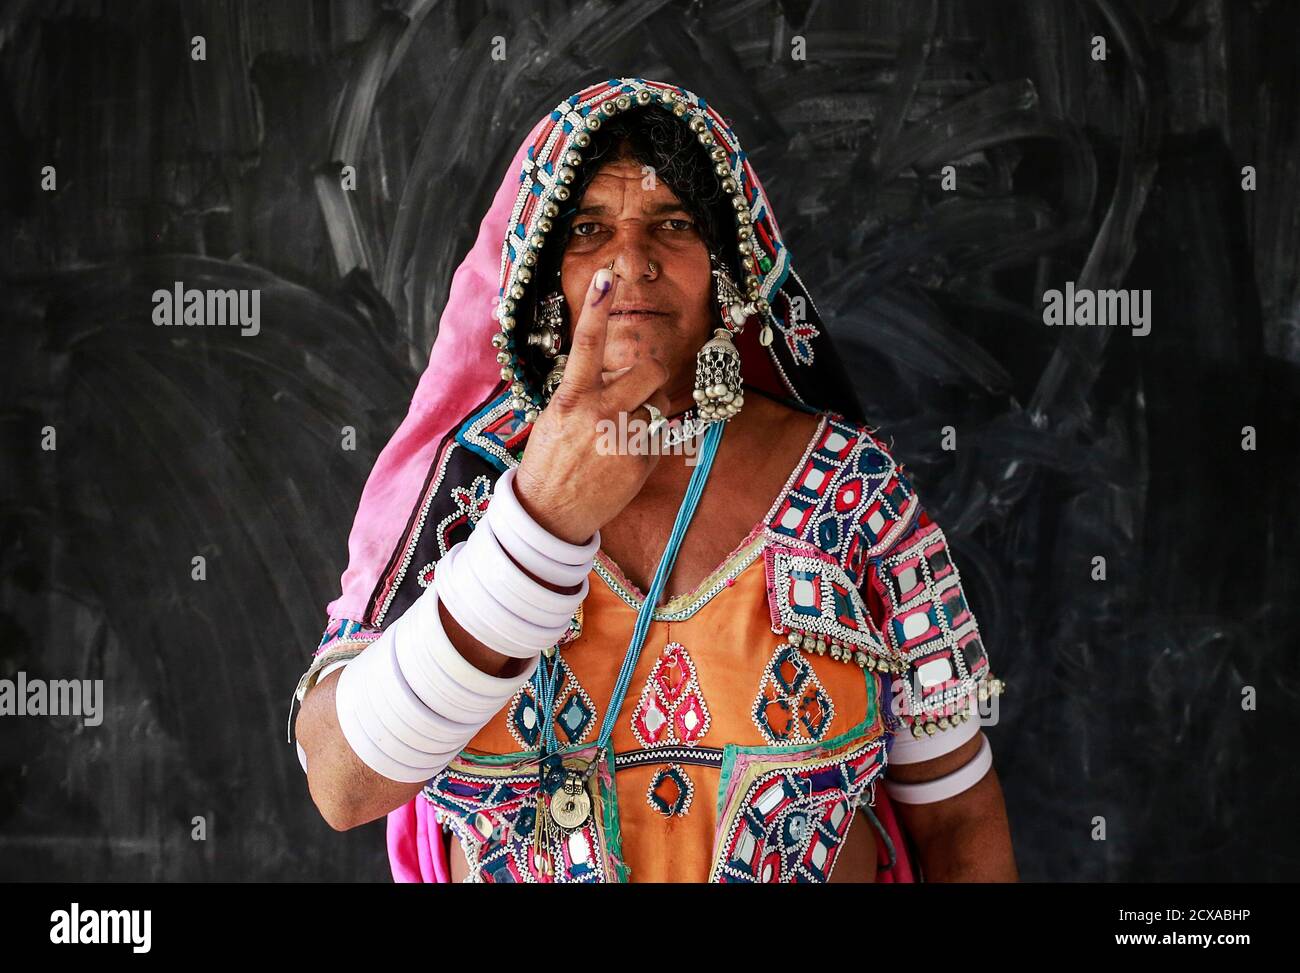 A tribal woman shows her ink-stained finger after voting at a polling centre during the seventh phase of India's general election, in Rangareddy district in the southern Indian state of Andhra Pradesh April 30, 2014. Around 815 million people have registered to vote in the world's biggest election - a number exceeding the population of Europe and a world record - and results of the mammoth exercise, which concludes on May 12, are due on May 16. REUTERS/Danish Siddiqui (INDIA - Tags: ELECTIONS POLITICS TPX IMAGES OF THE DAY) Stock Photo